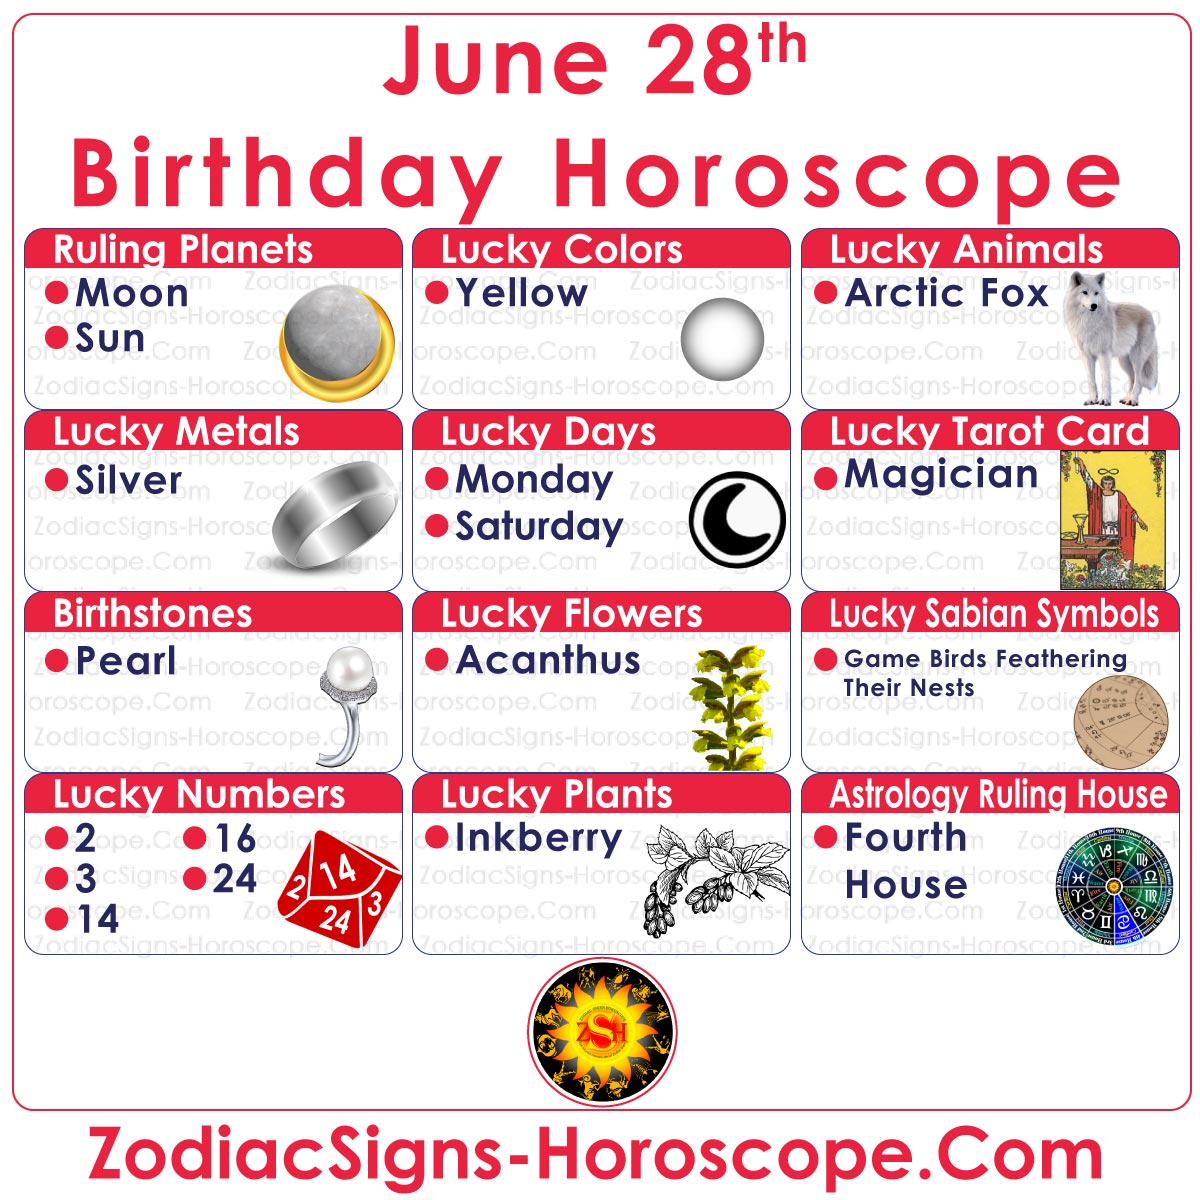 June 28 Zodiac Lucky Numbers, Days, Colors and more